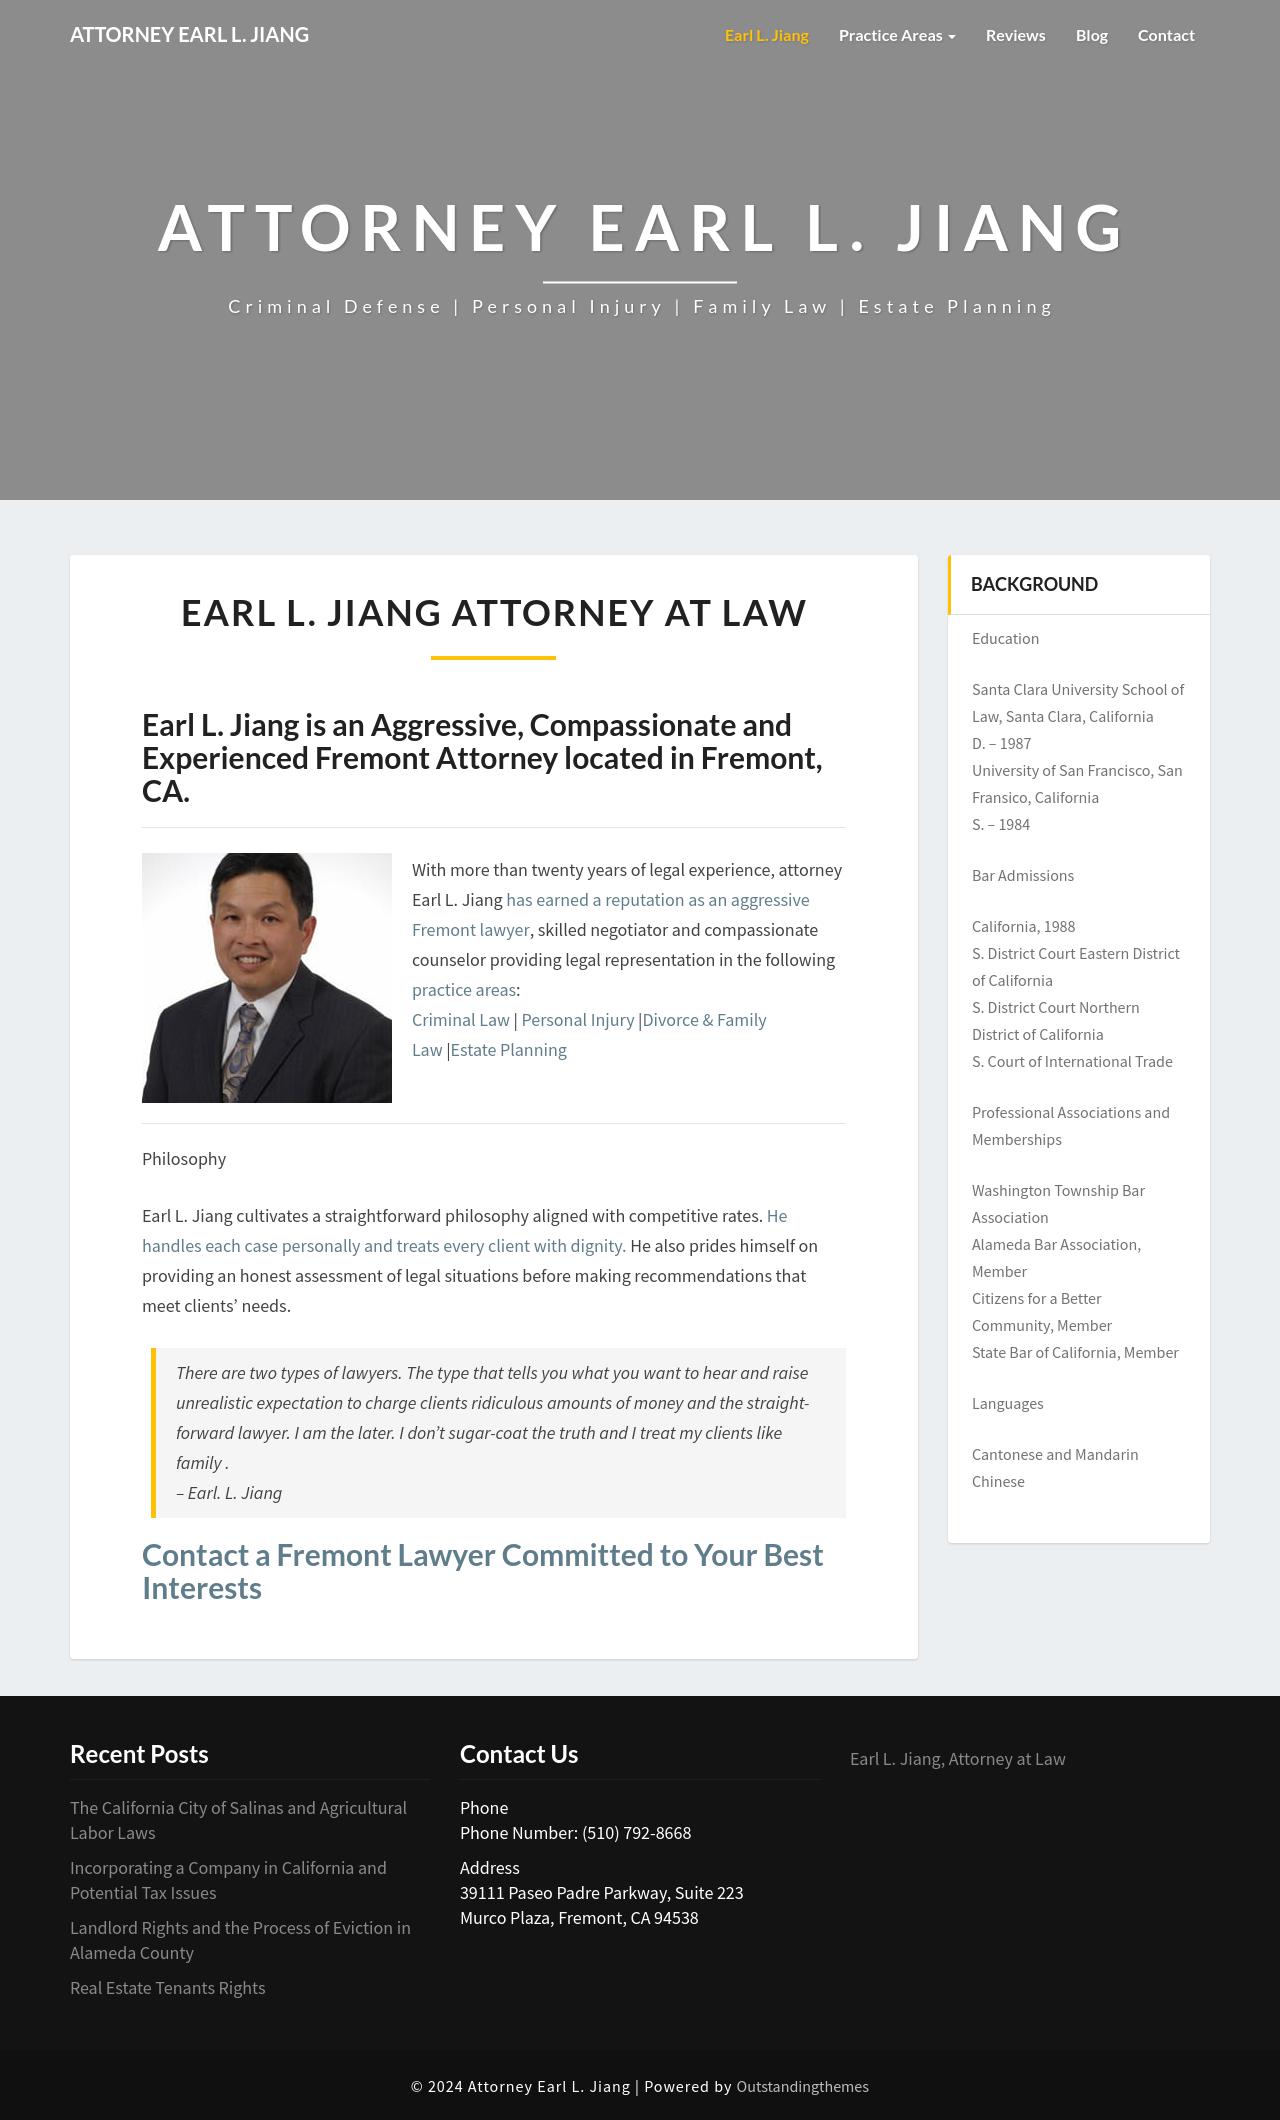 Earl L. Jiang, Attorney at Law - Fremont CA Lawyers